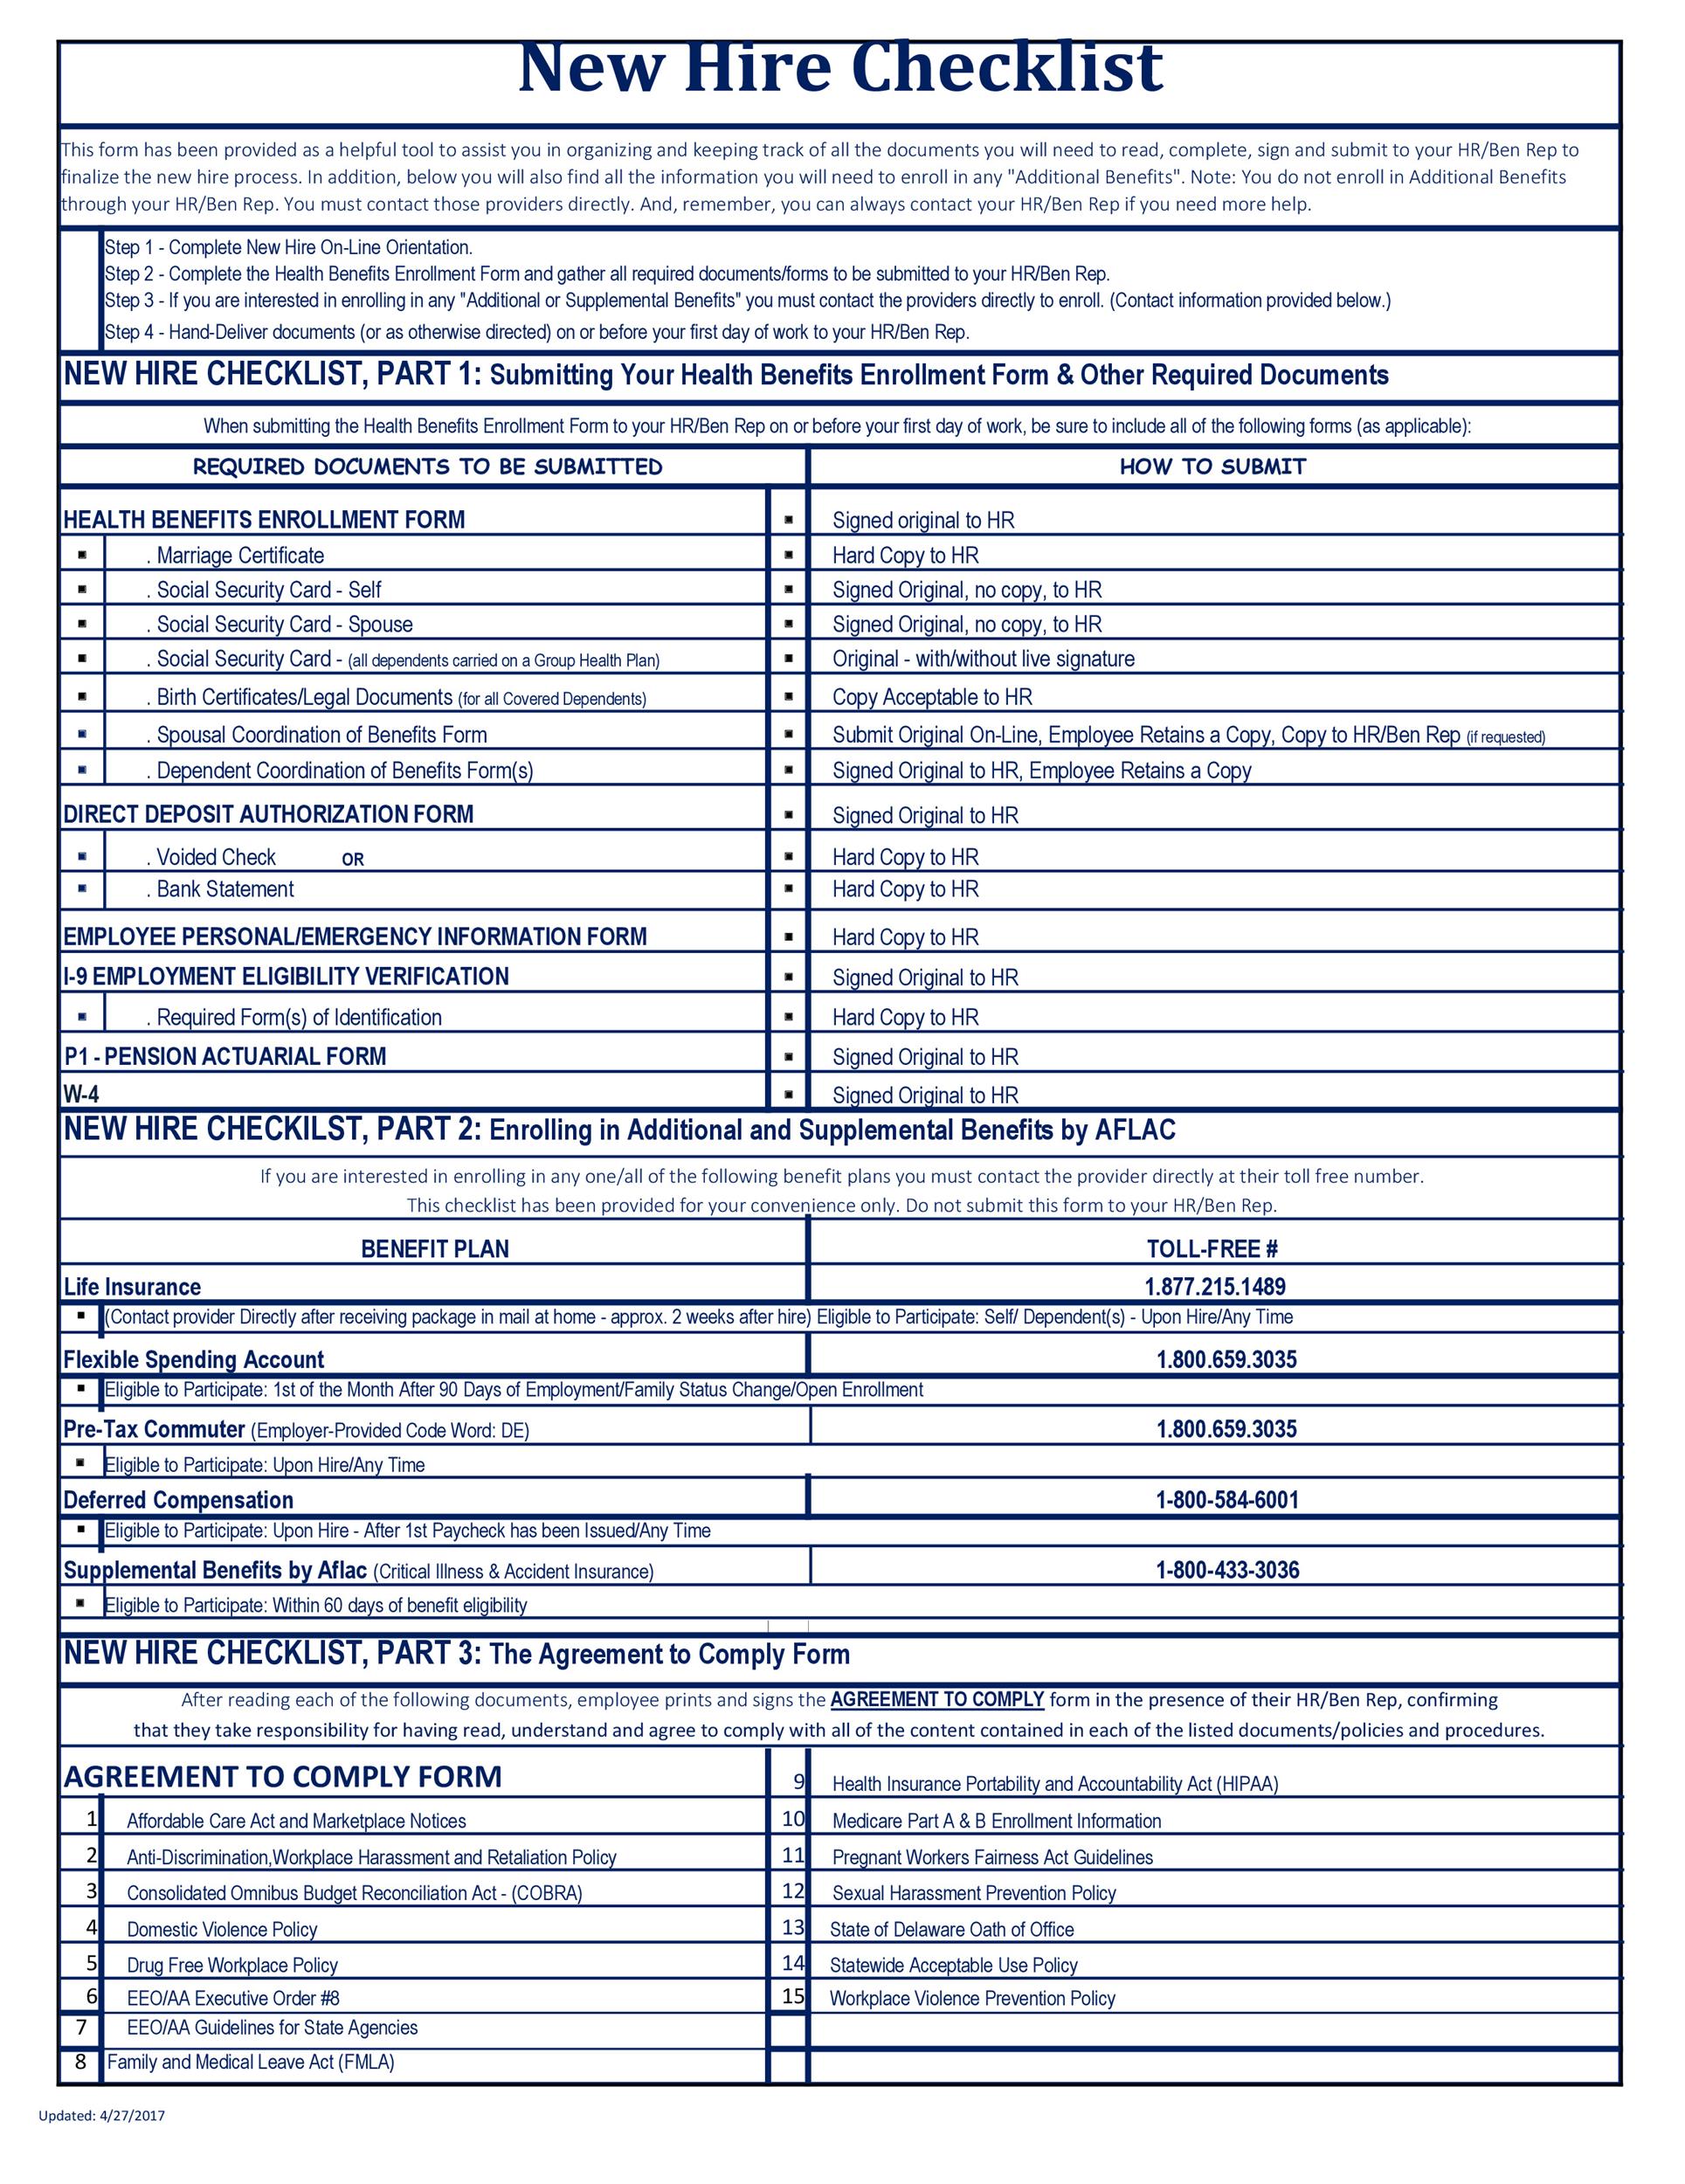 50 Useful New Hire Checklist Templates & Forms ᐅ TemplateLab